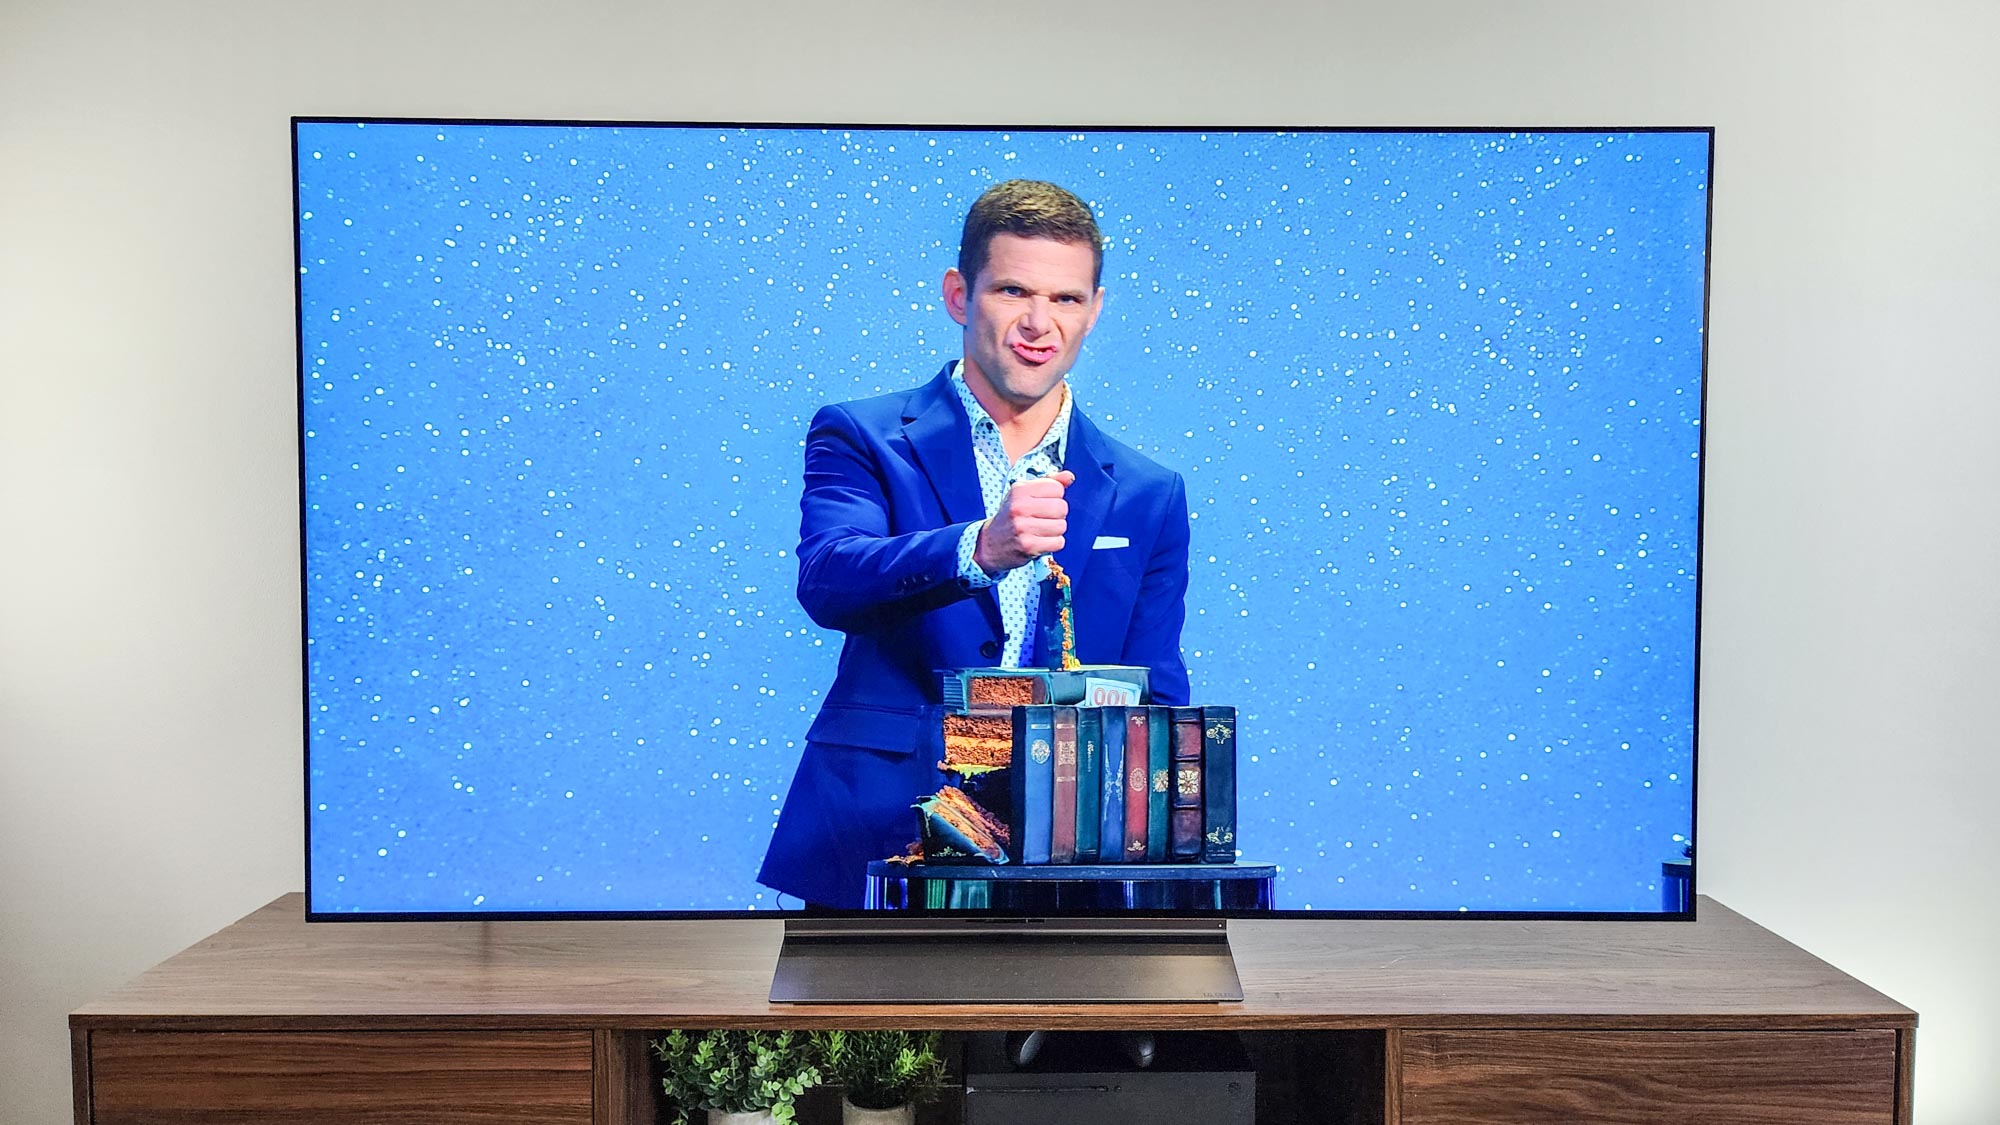 LG C4 OLED TV shown in a living room